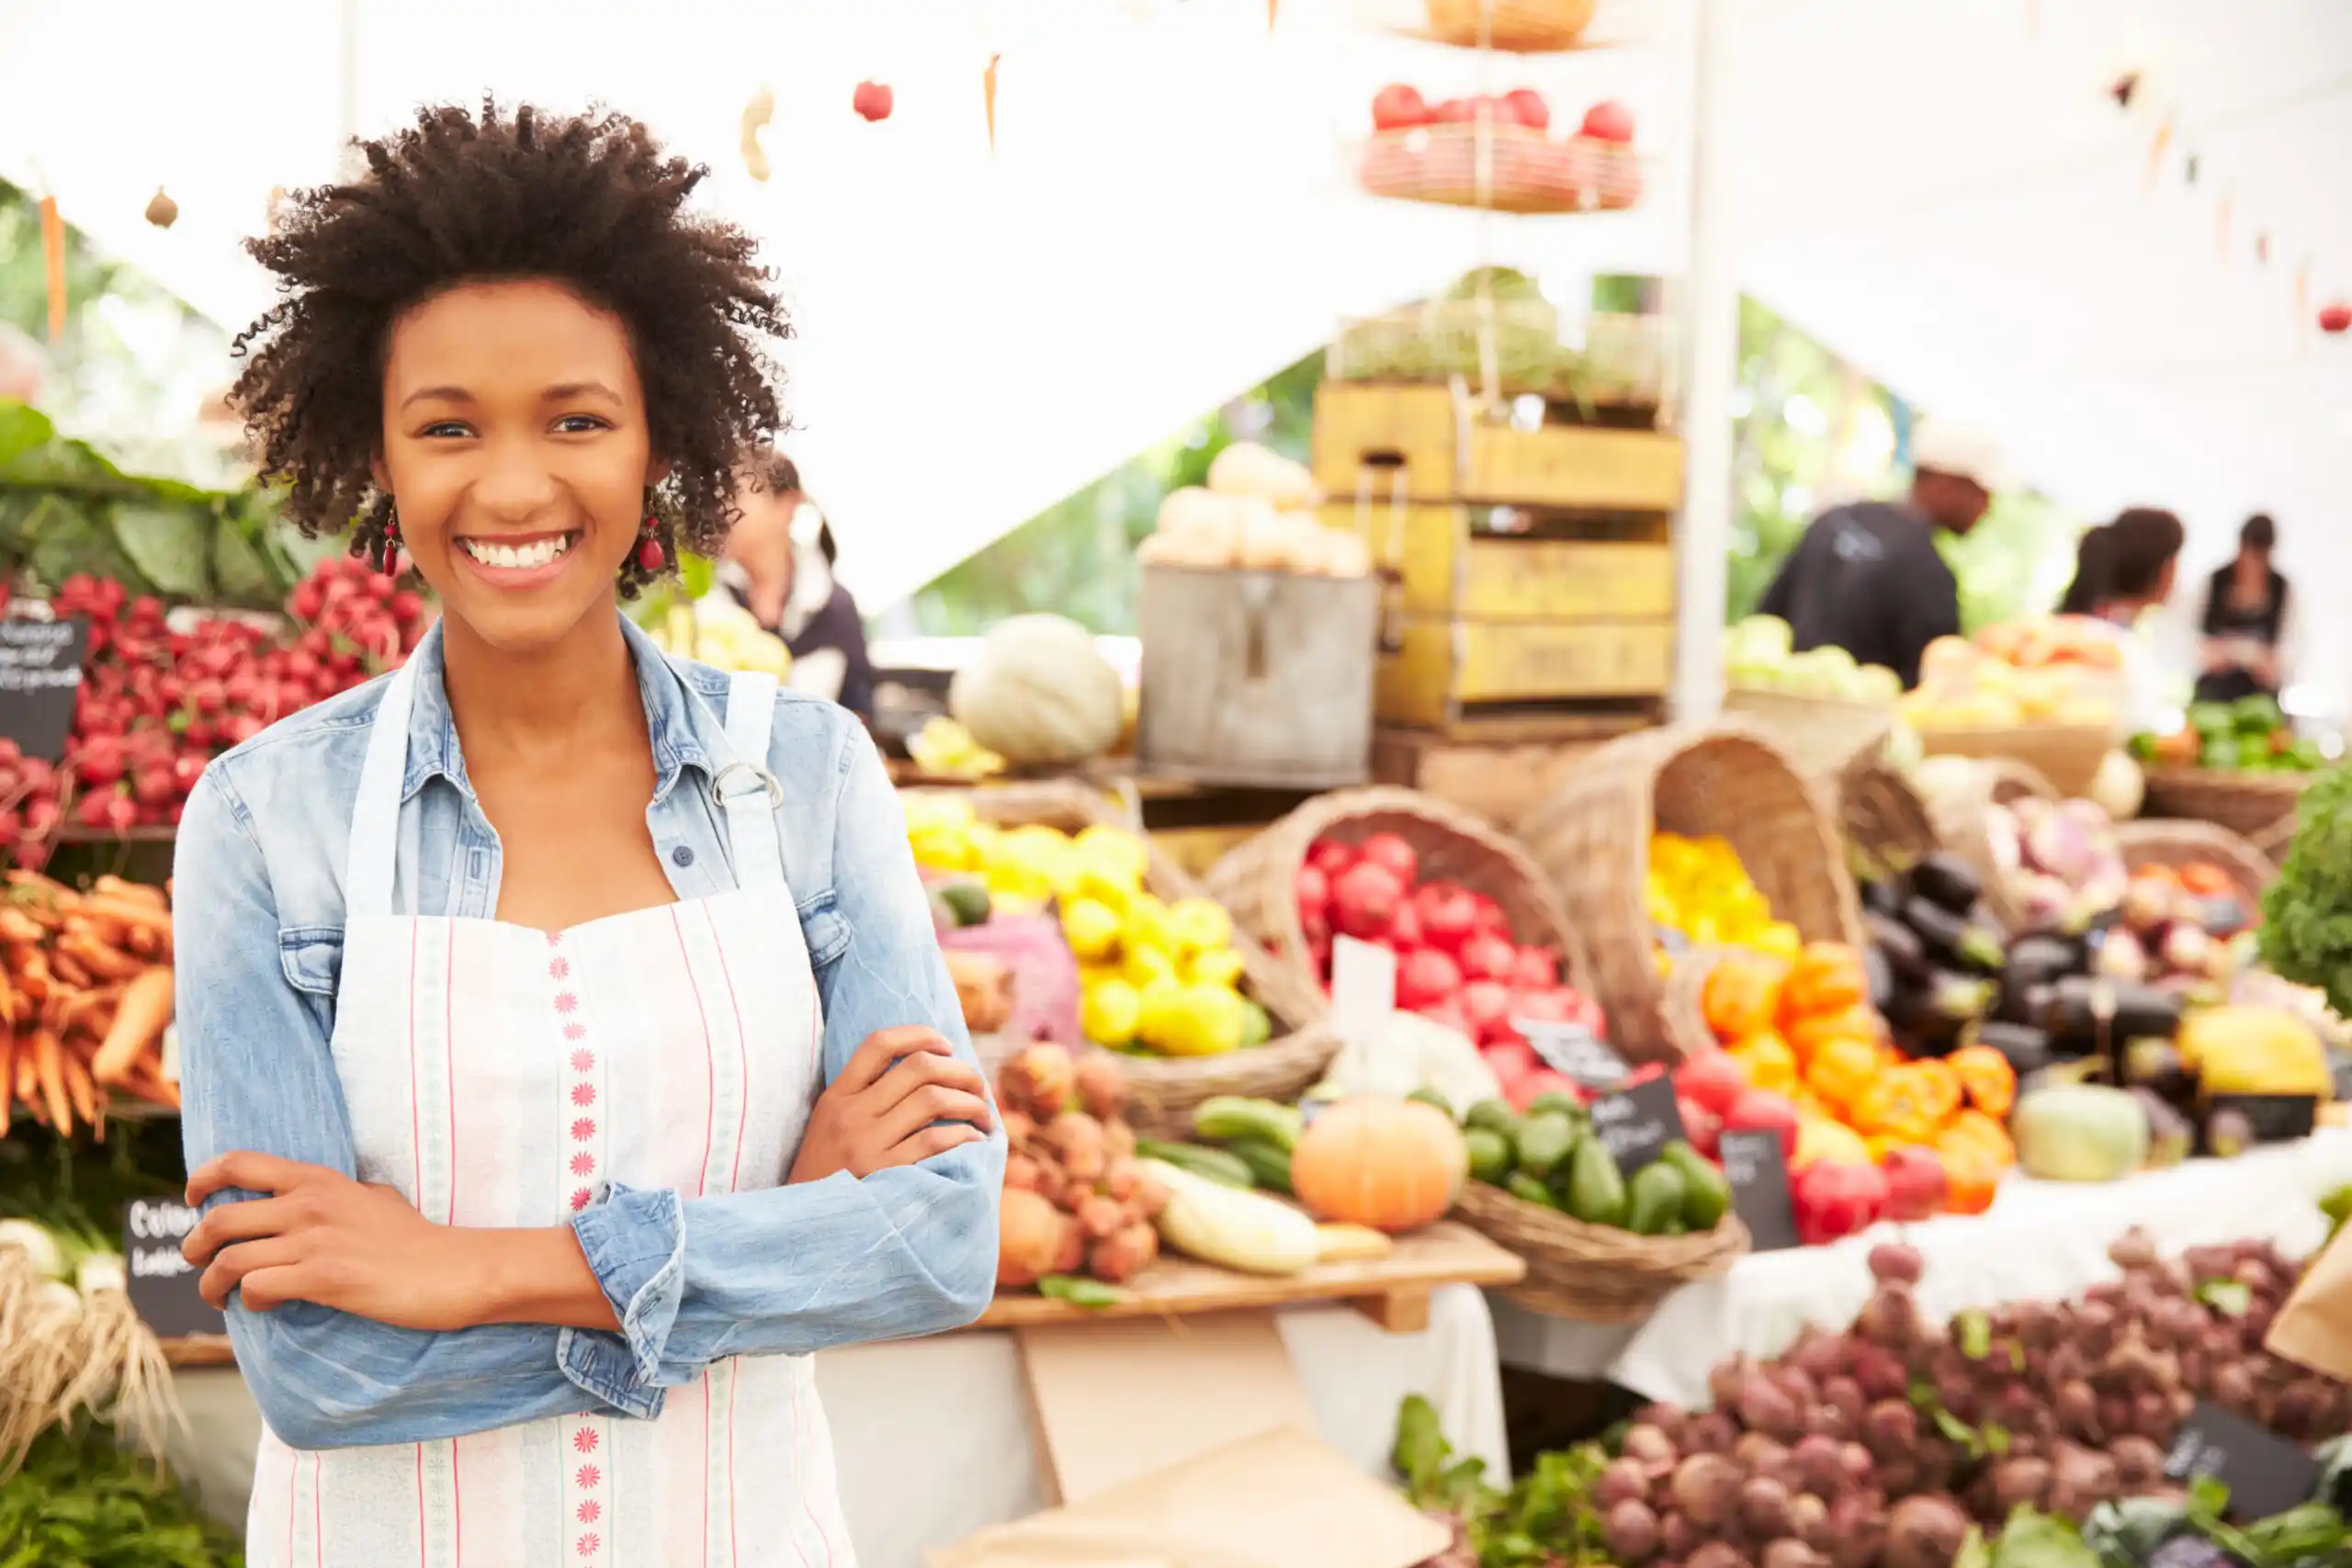 How To Save Money Shopping At The Farmers’ Market